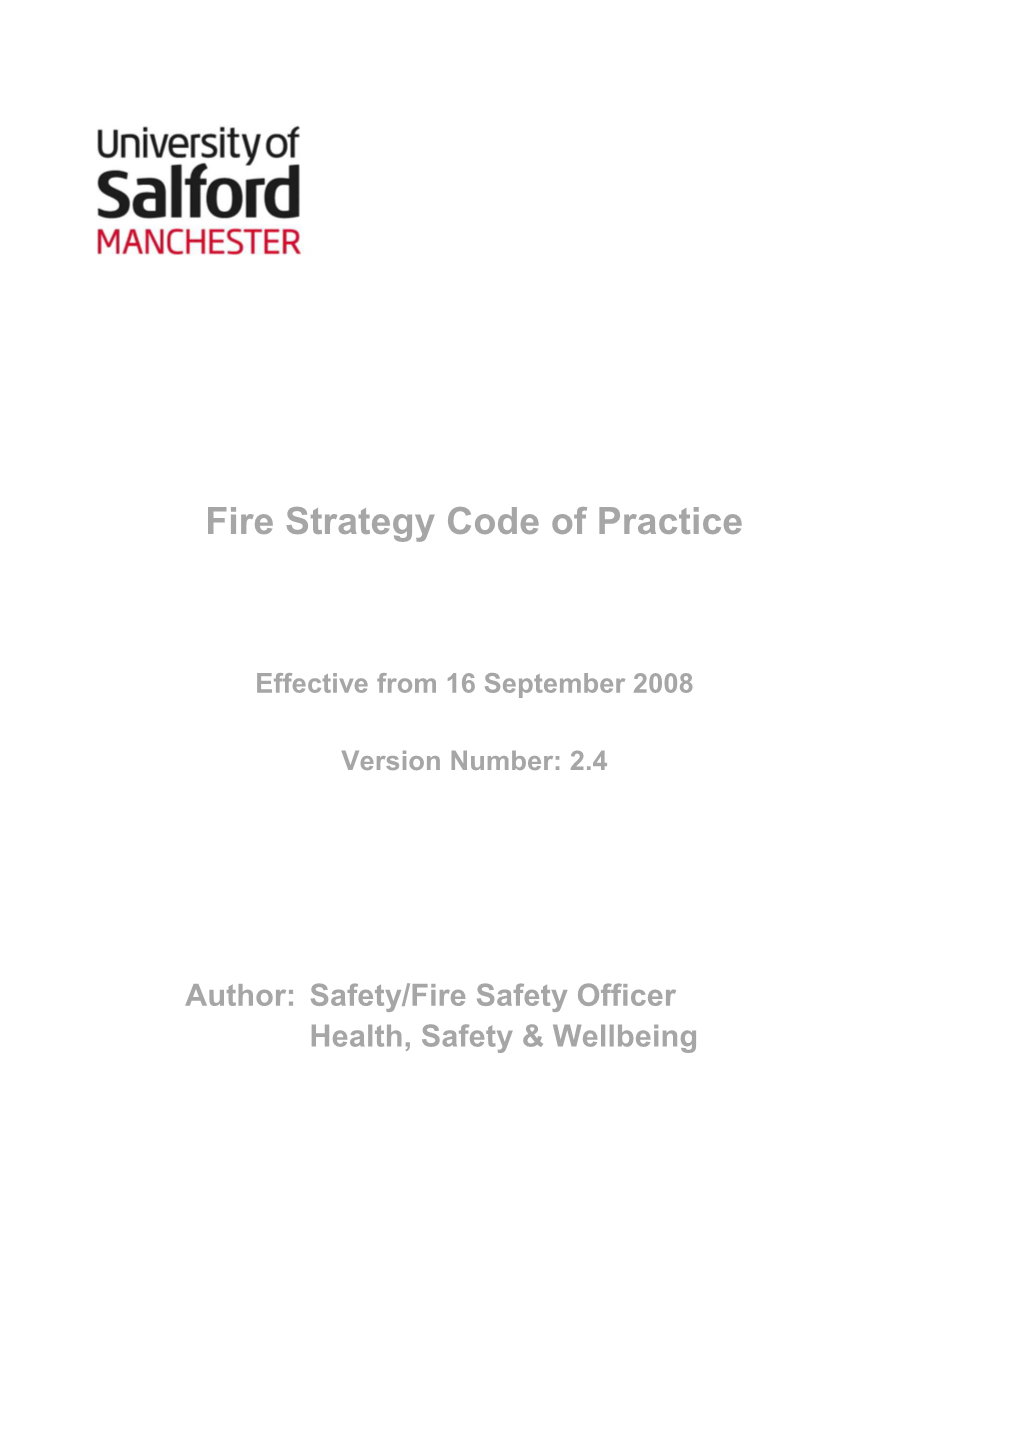 University of Salford Code of Practice Title and Version